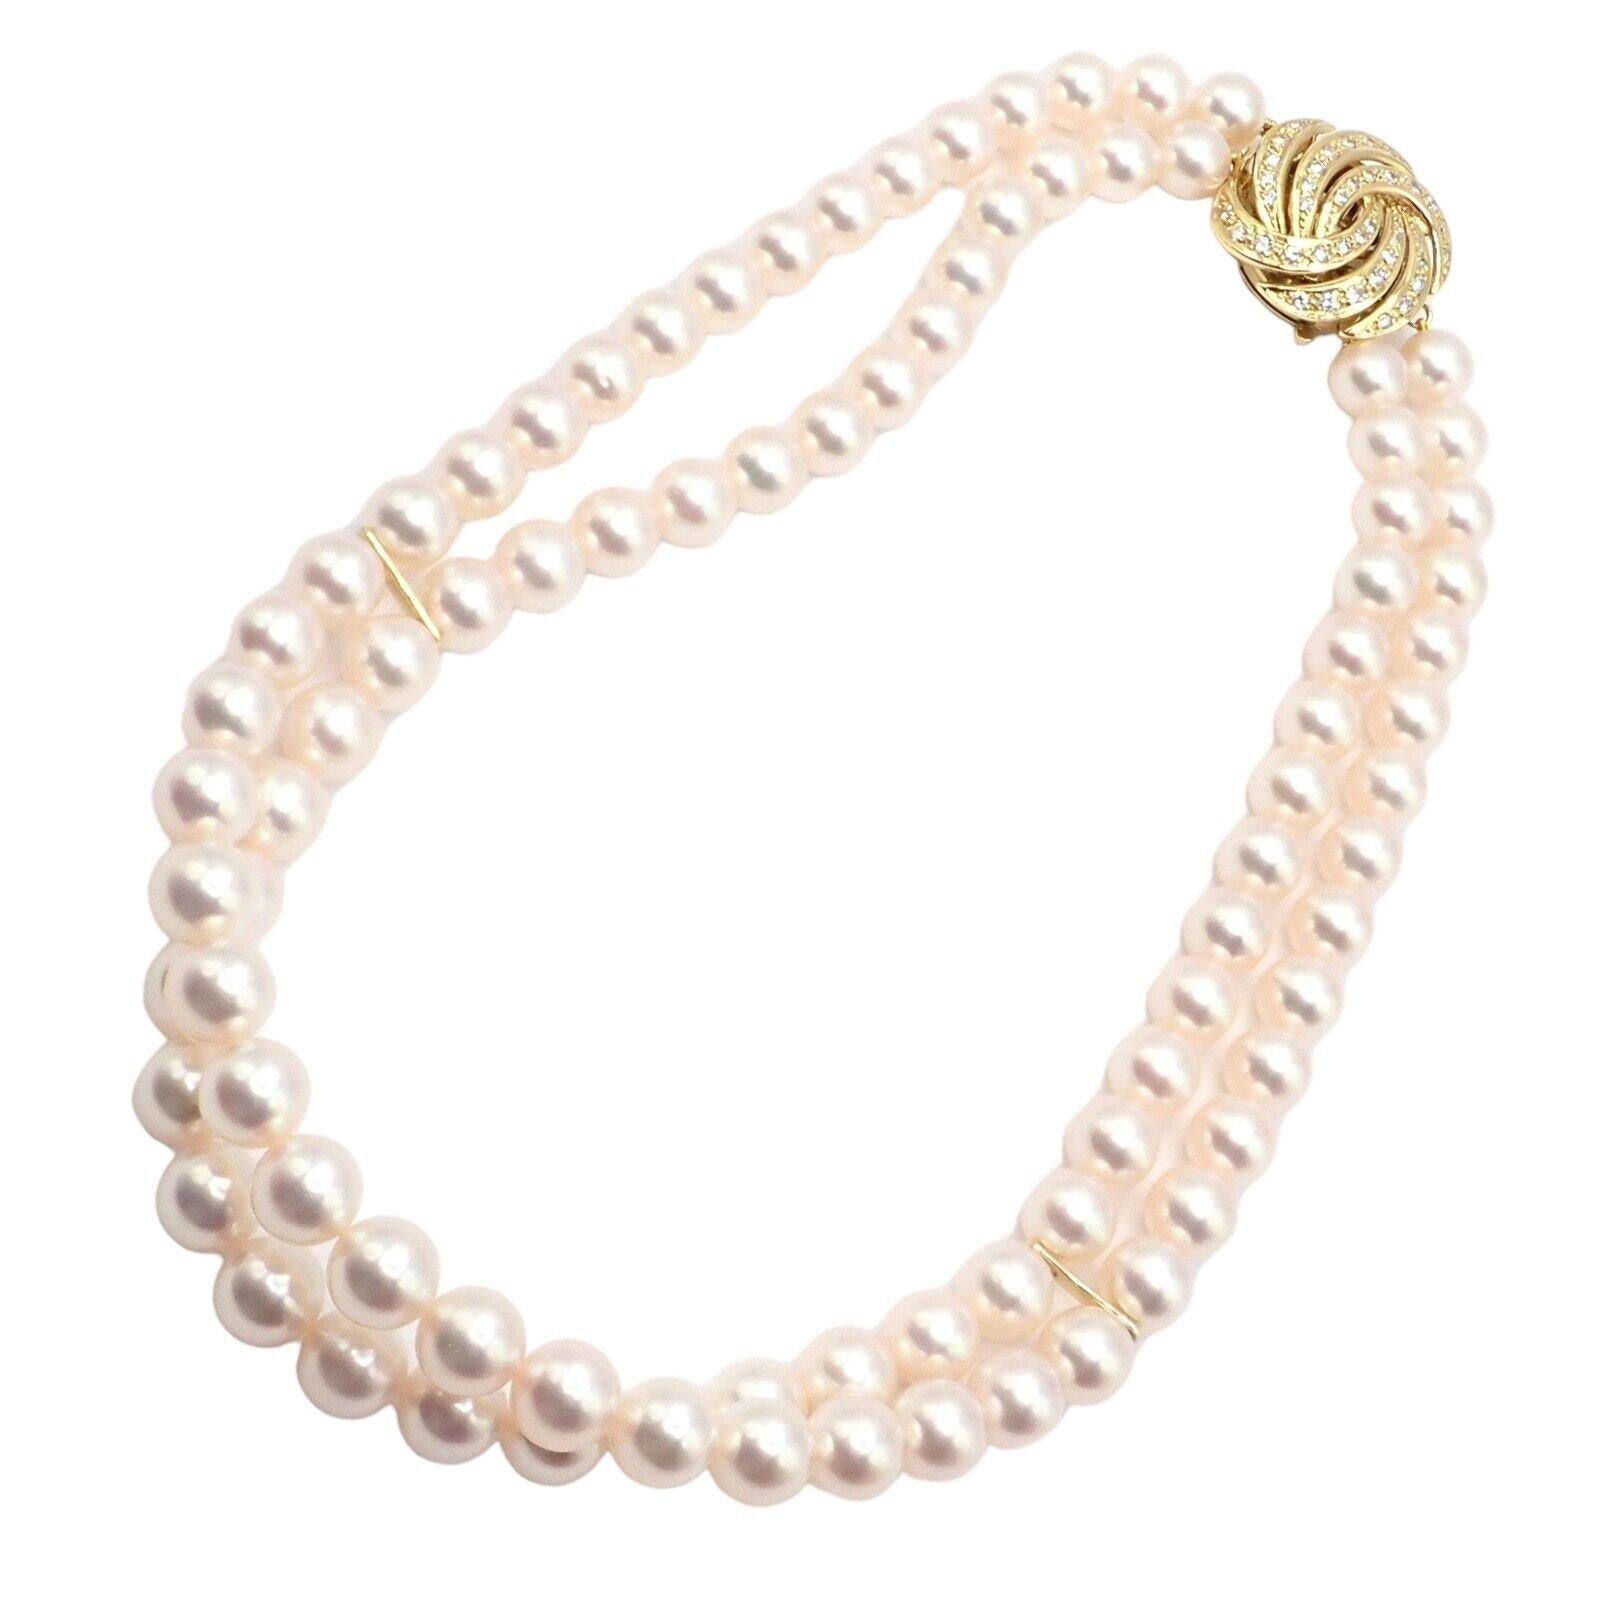 how much is a strand of mikimoto pearls worth